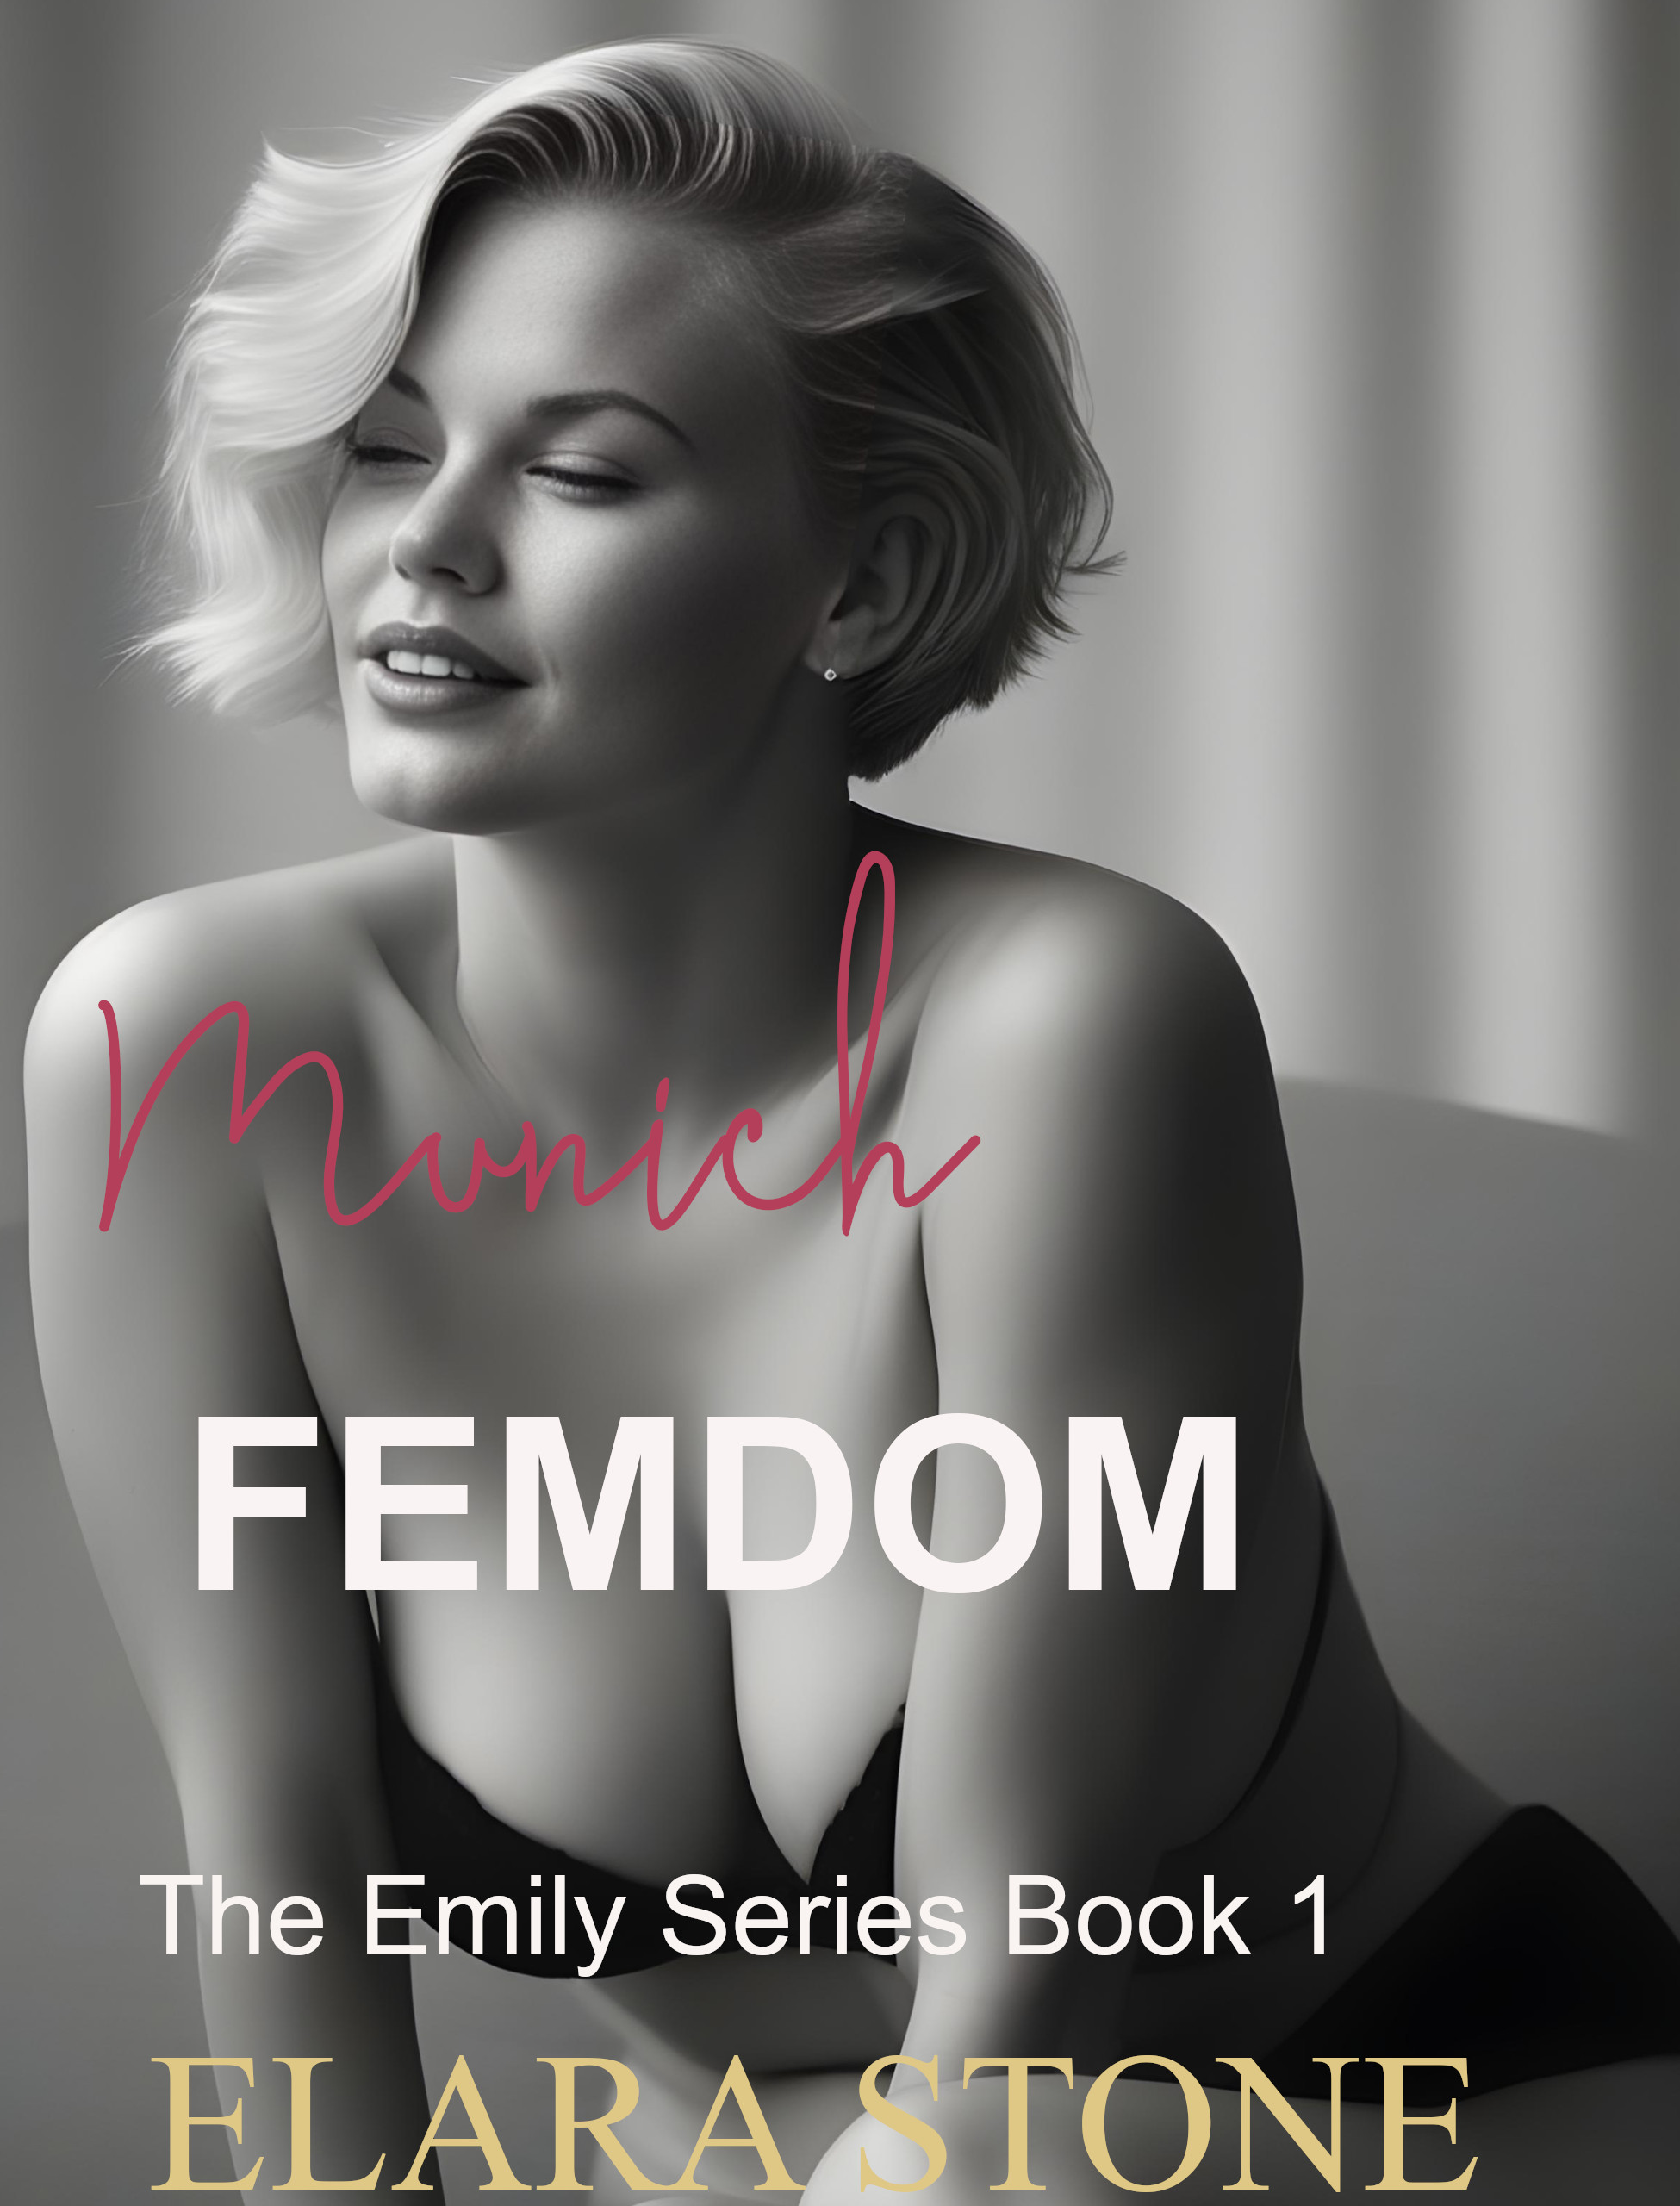 Germany Femdom book cover